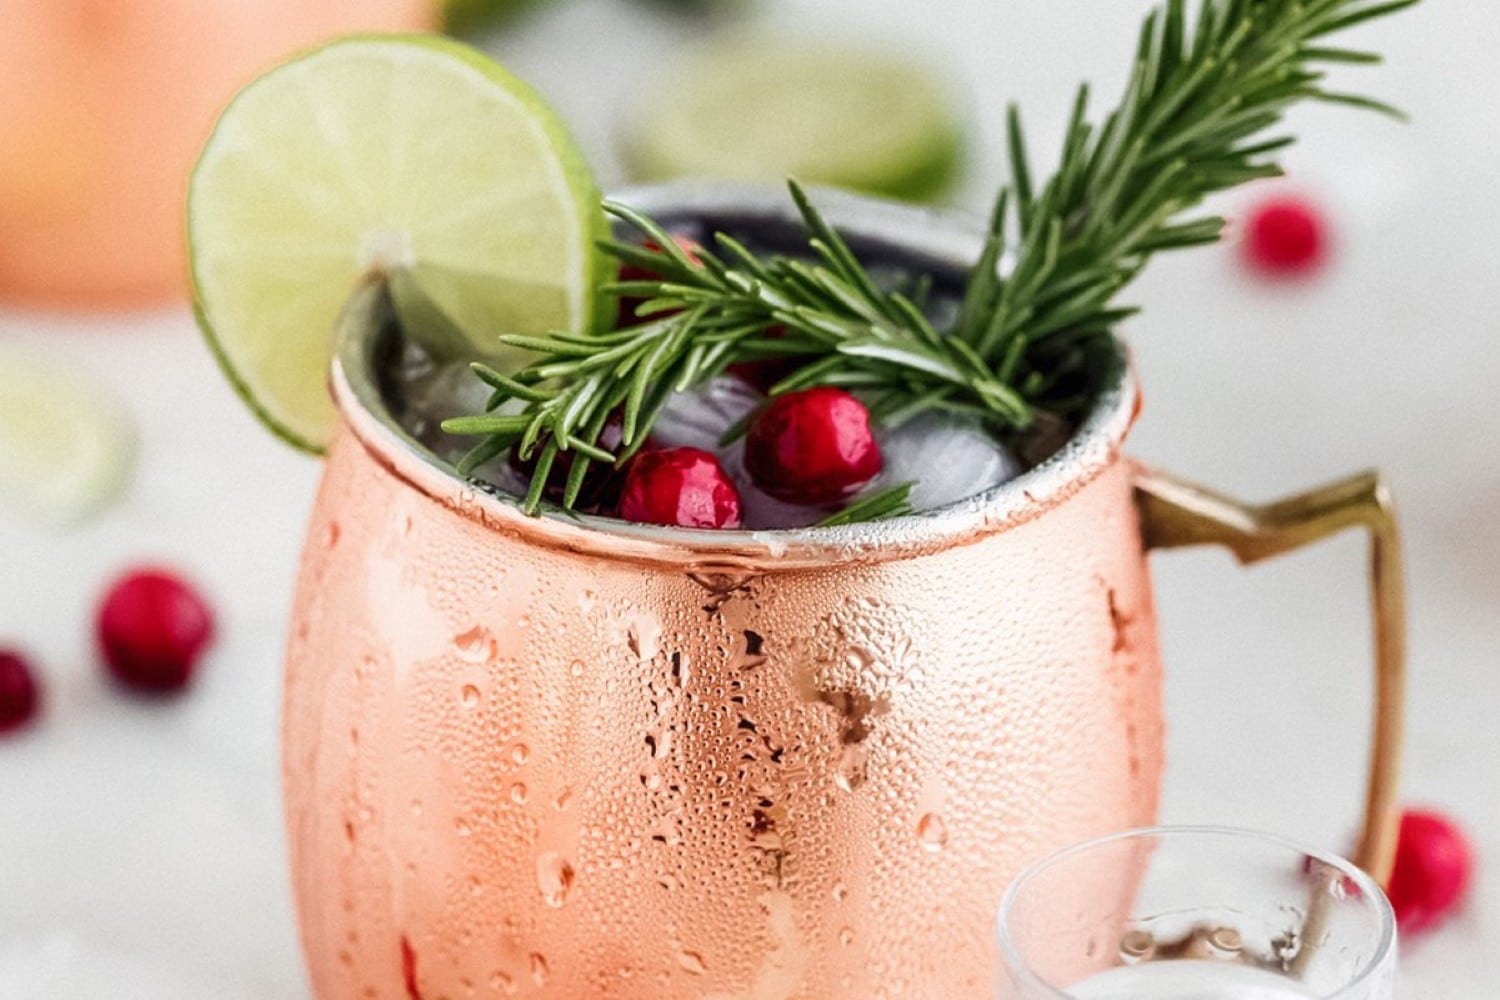 Get the Holiday Moscow Mule recipe